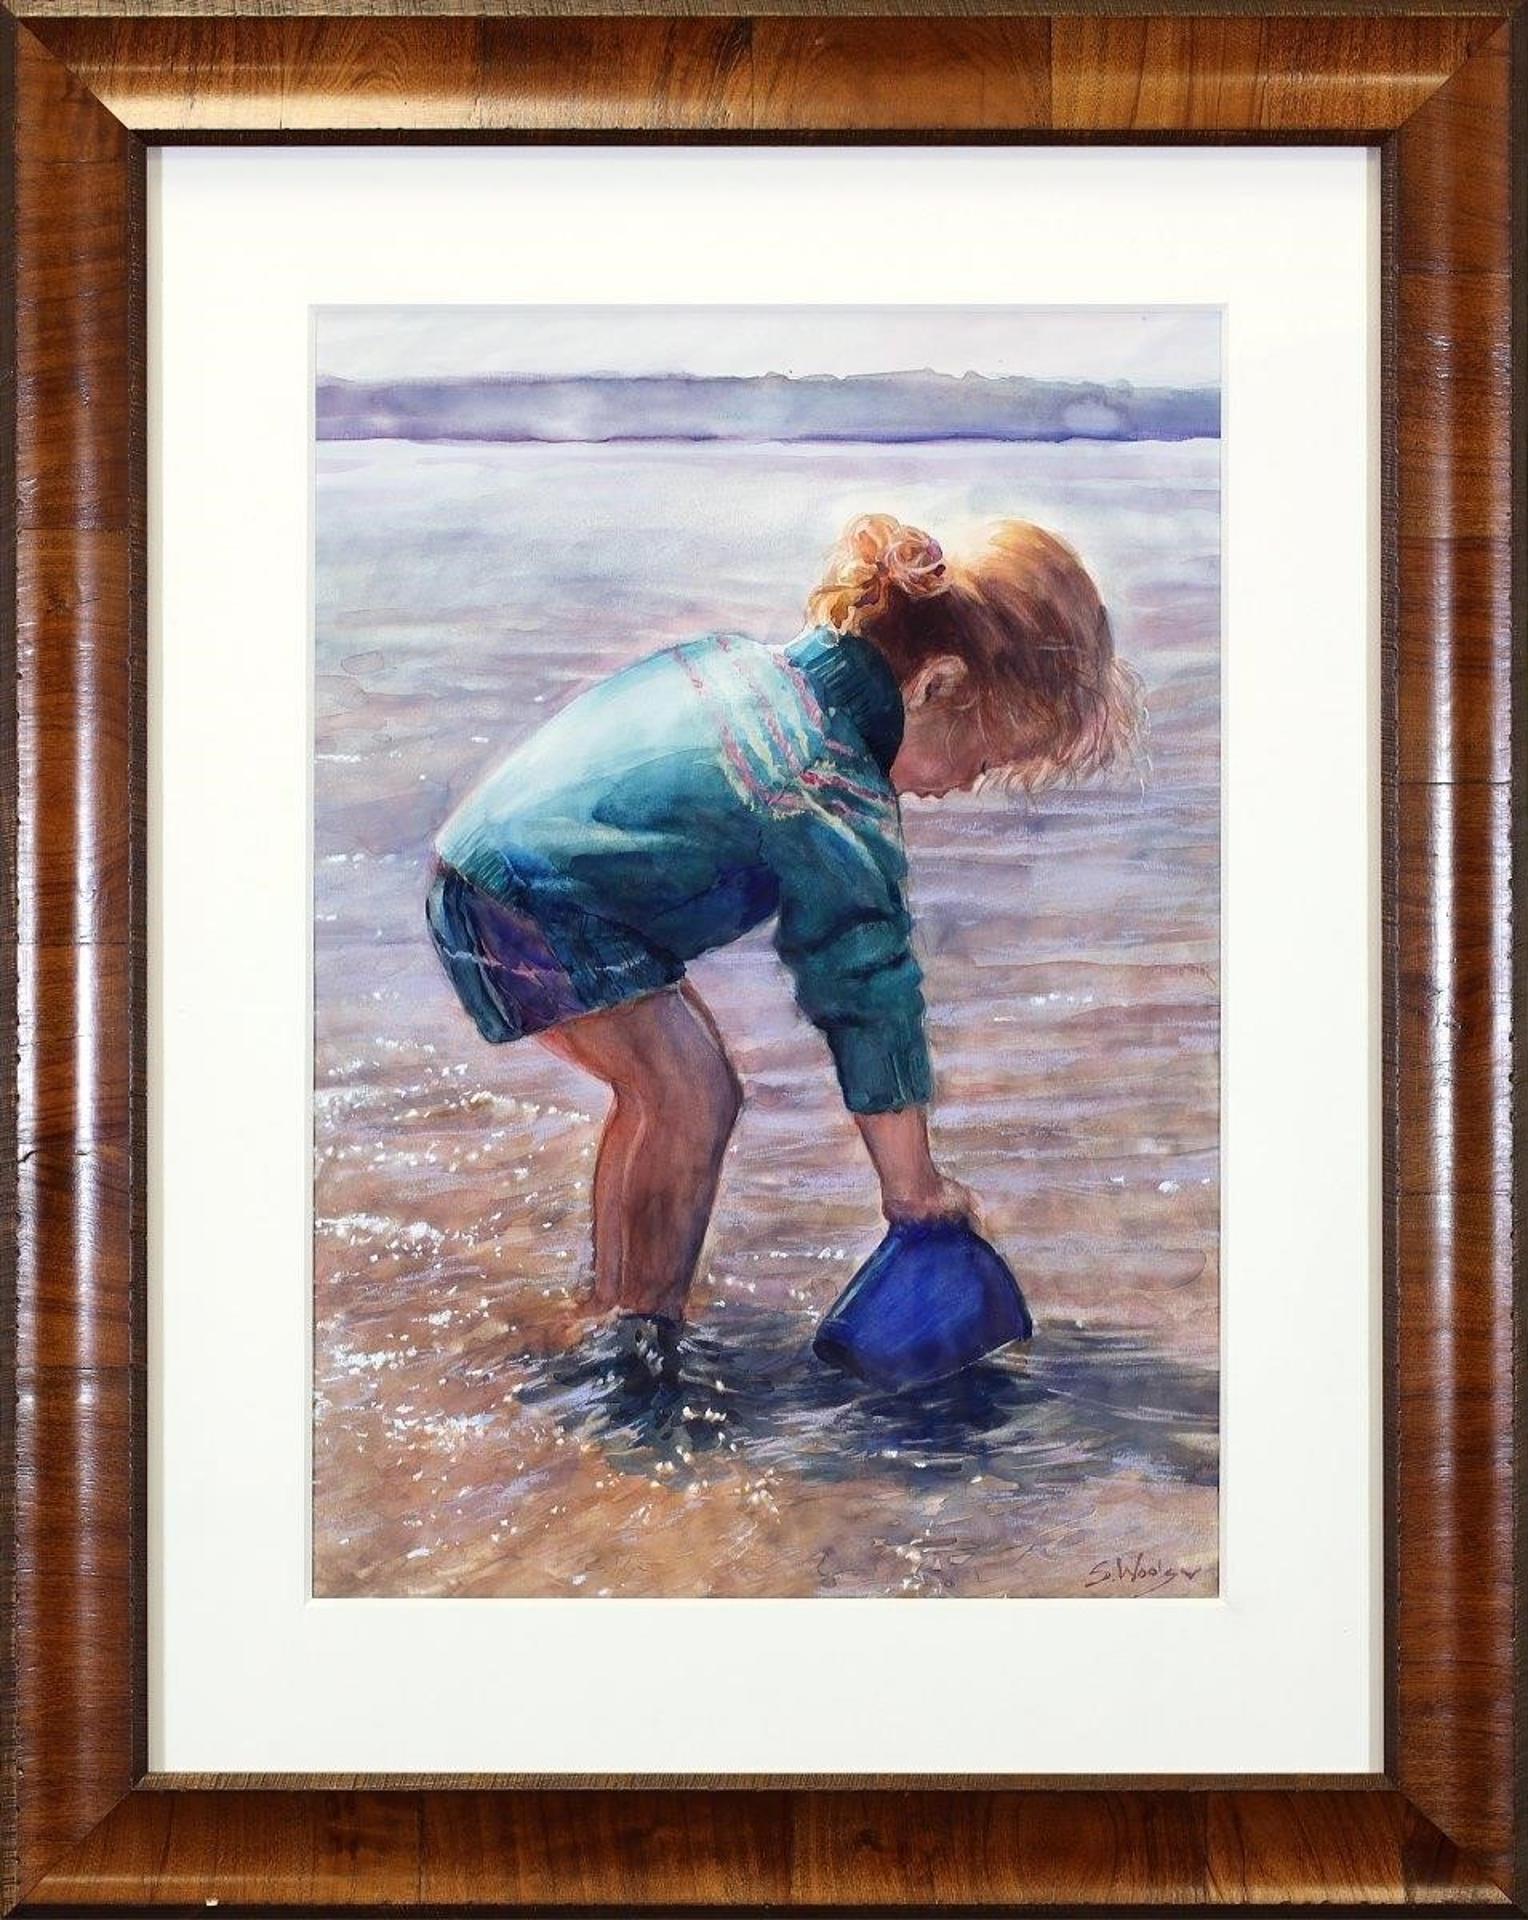 Susan Woolgar (1955) - Untitled, Little Girl Wading with Water Pail